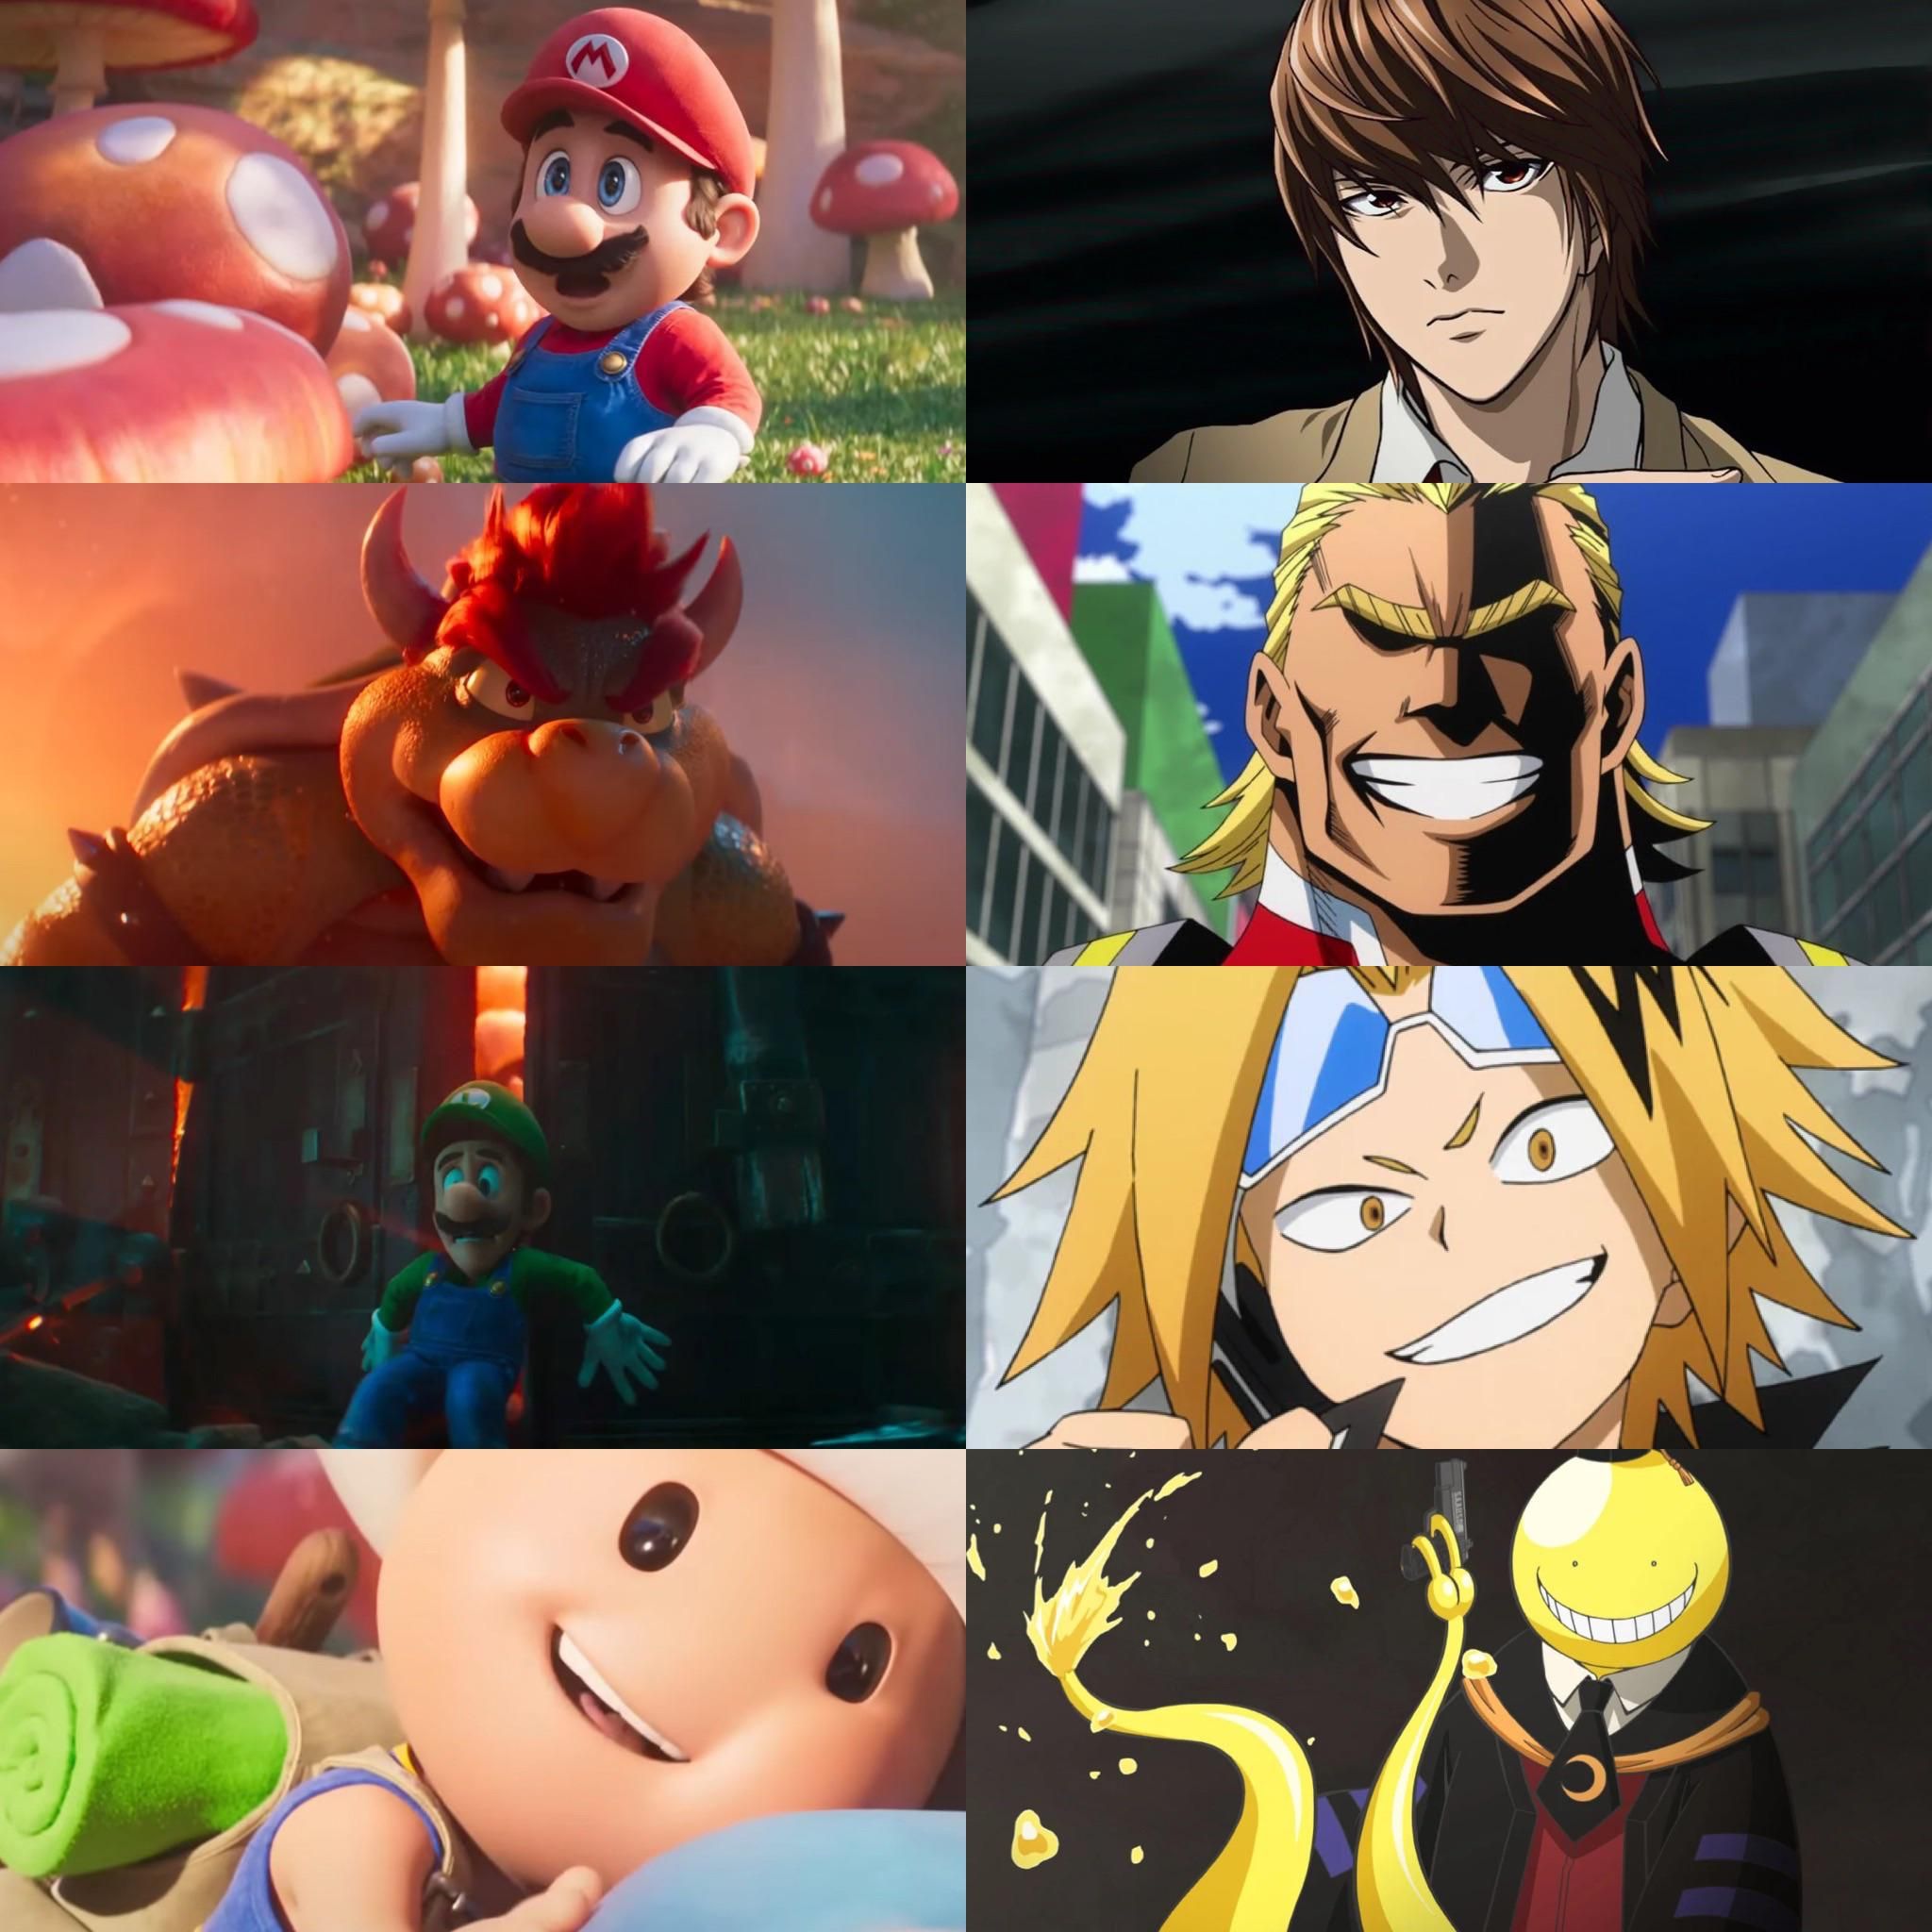 Roles the Japanese VAs for the Mario movie have played